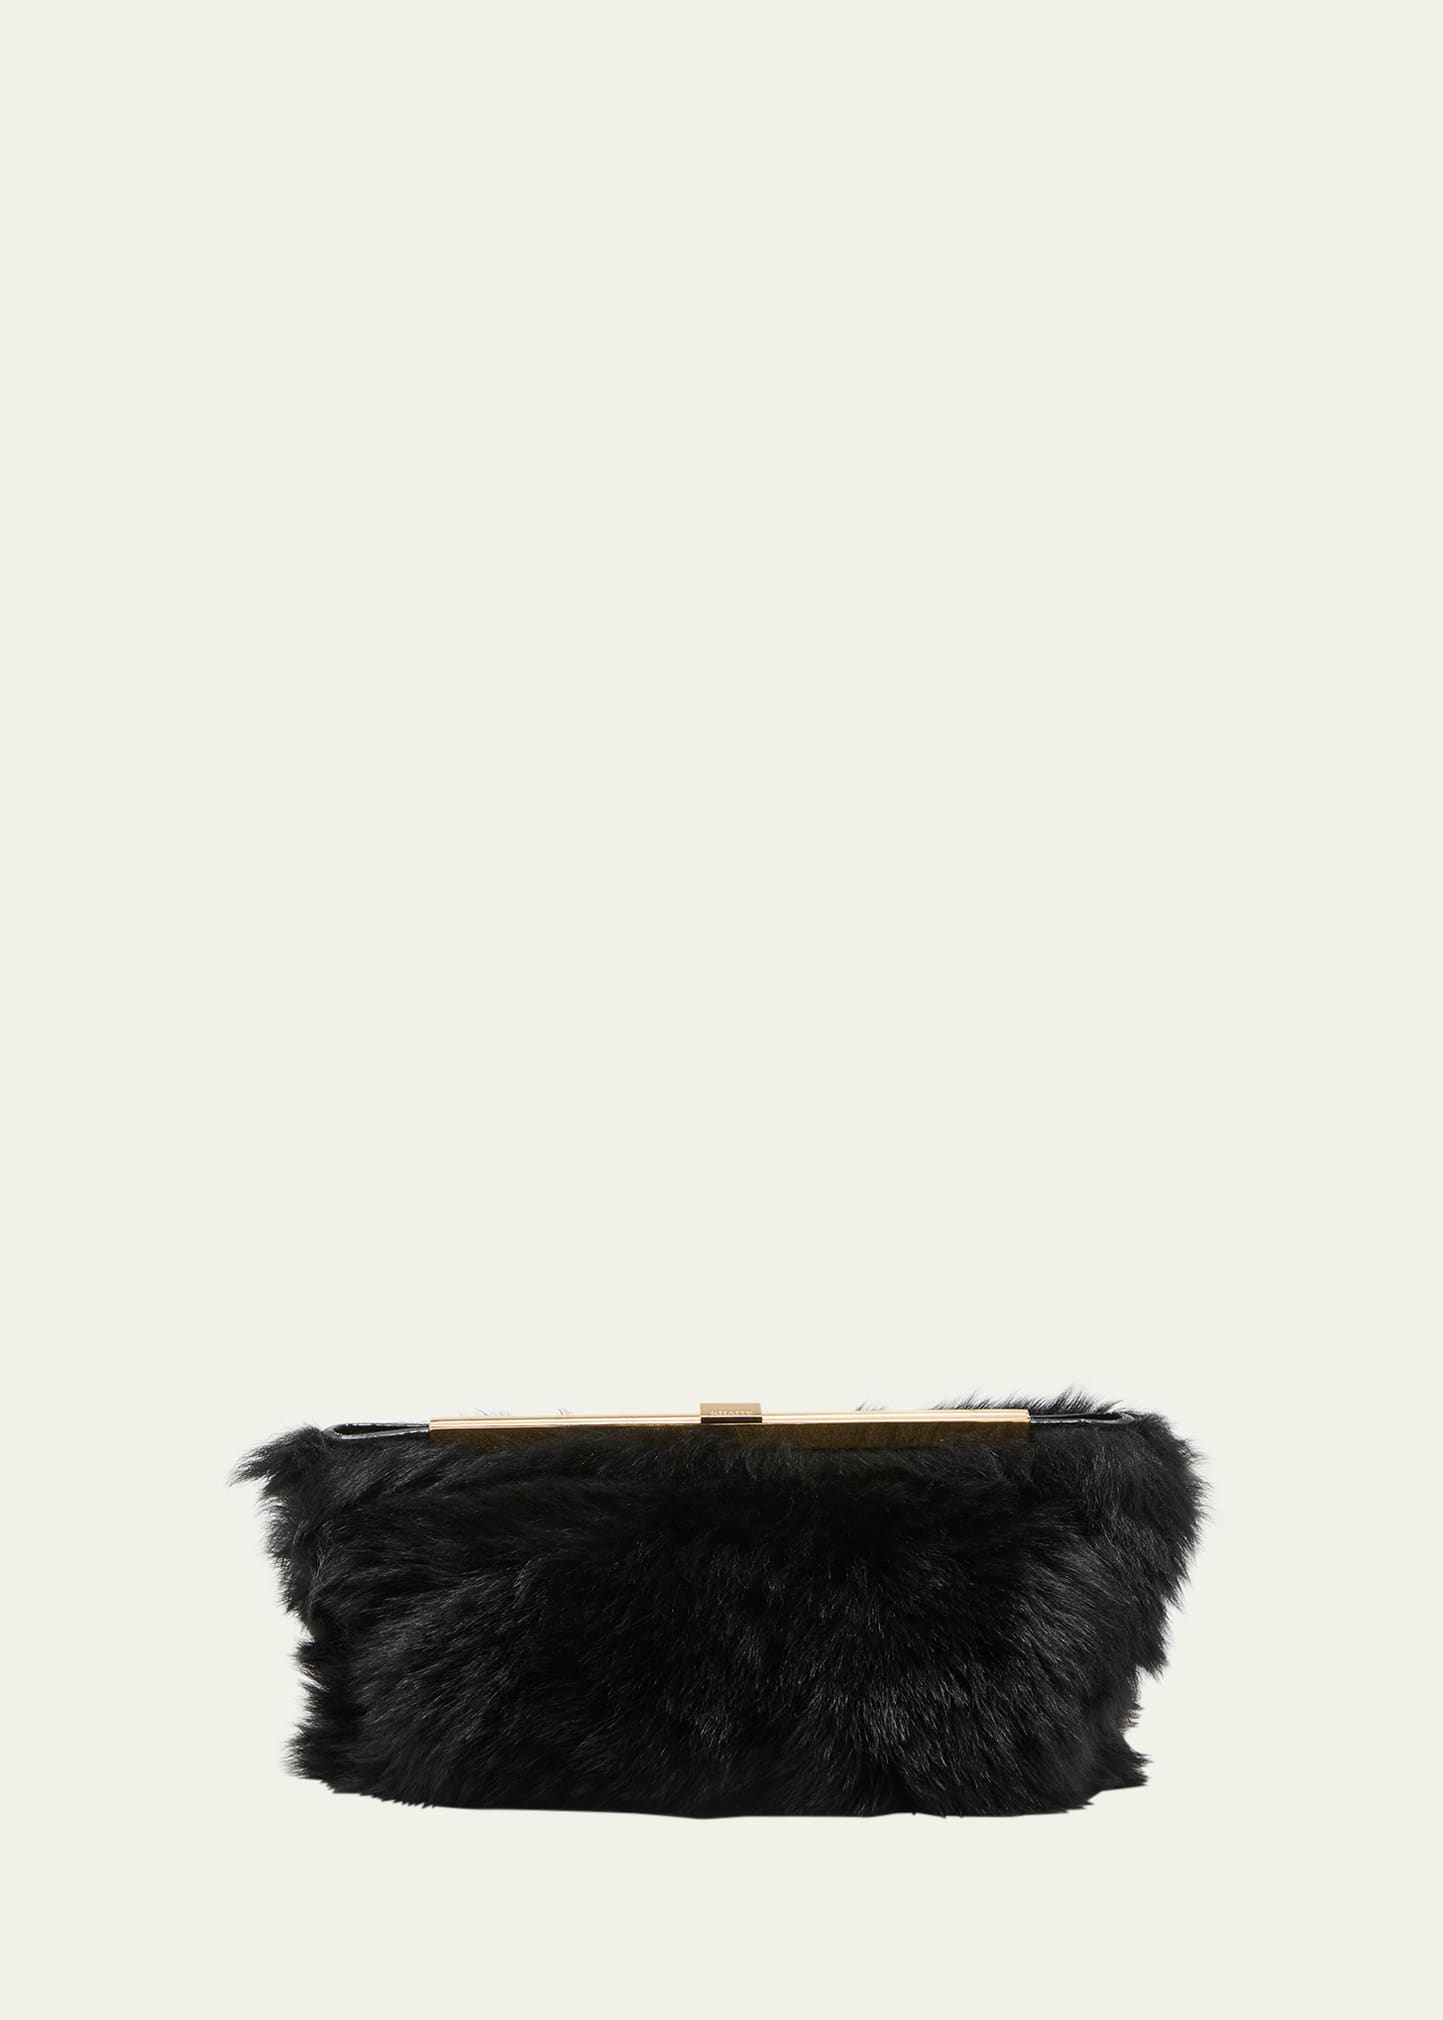 The Lilith Evening Bag in Black Leather– KHAITE